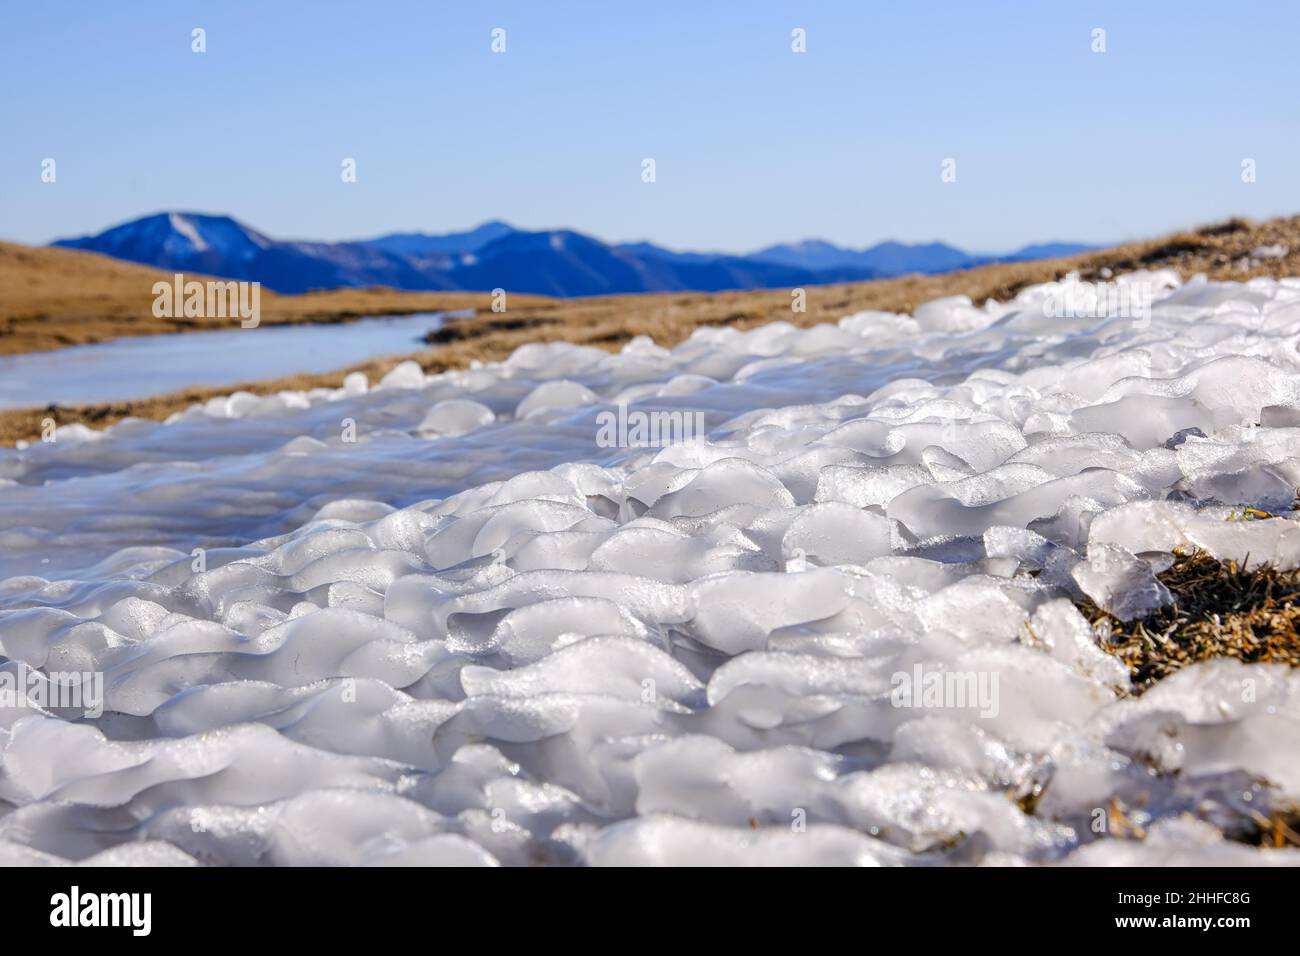 Ice formations in winter Stock Photo